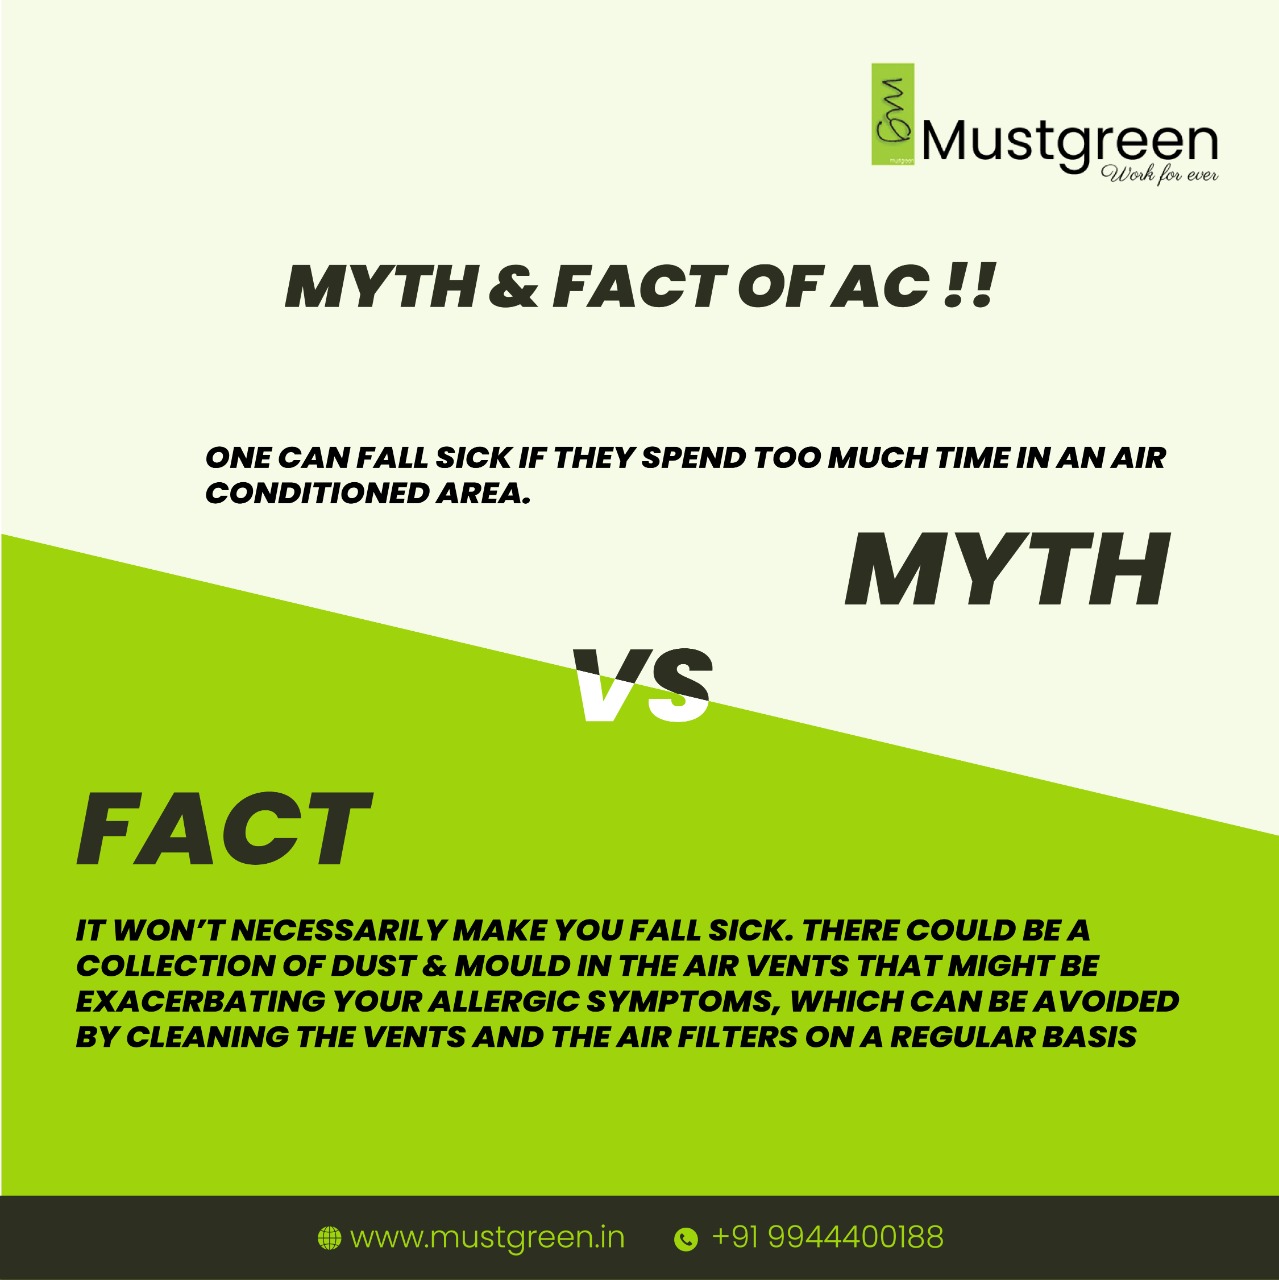 myth-and-fact-of-ac